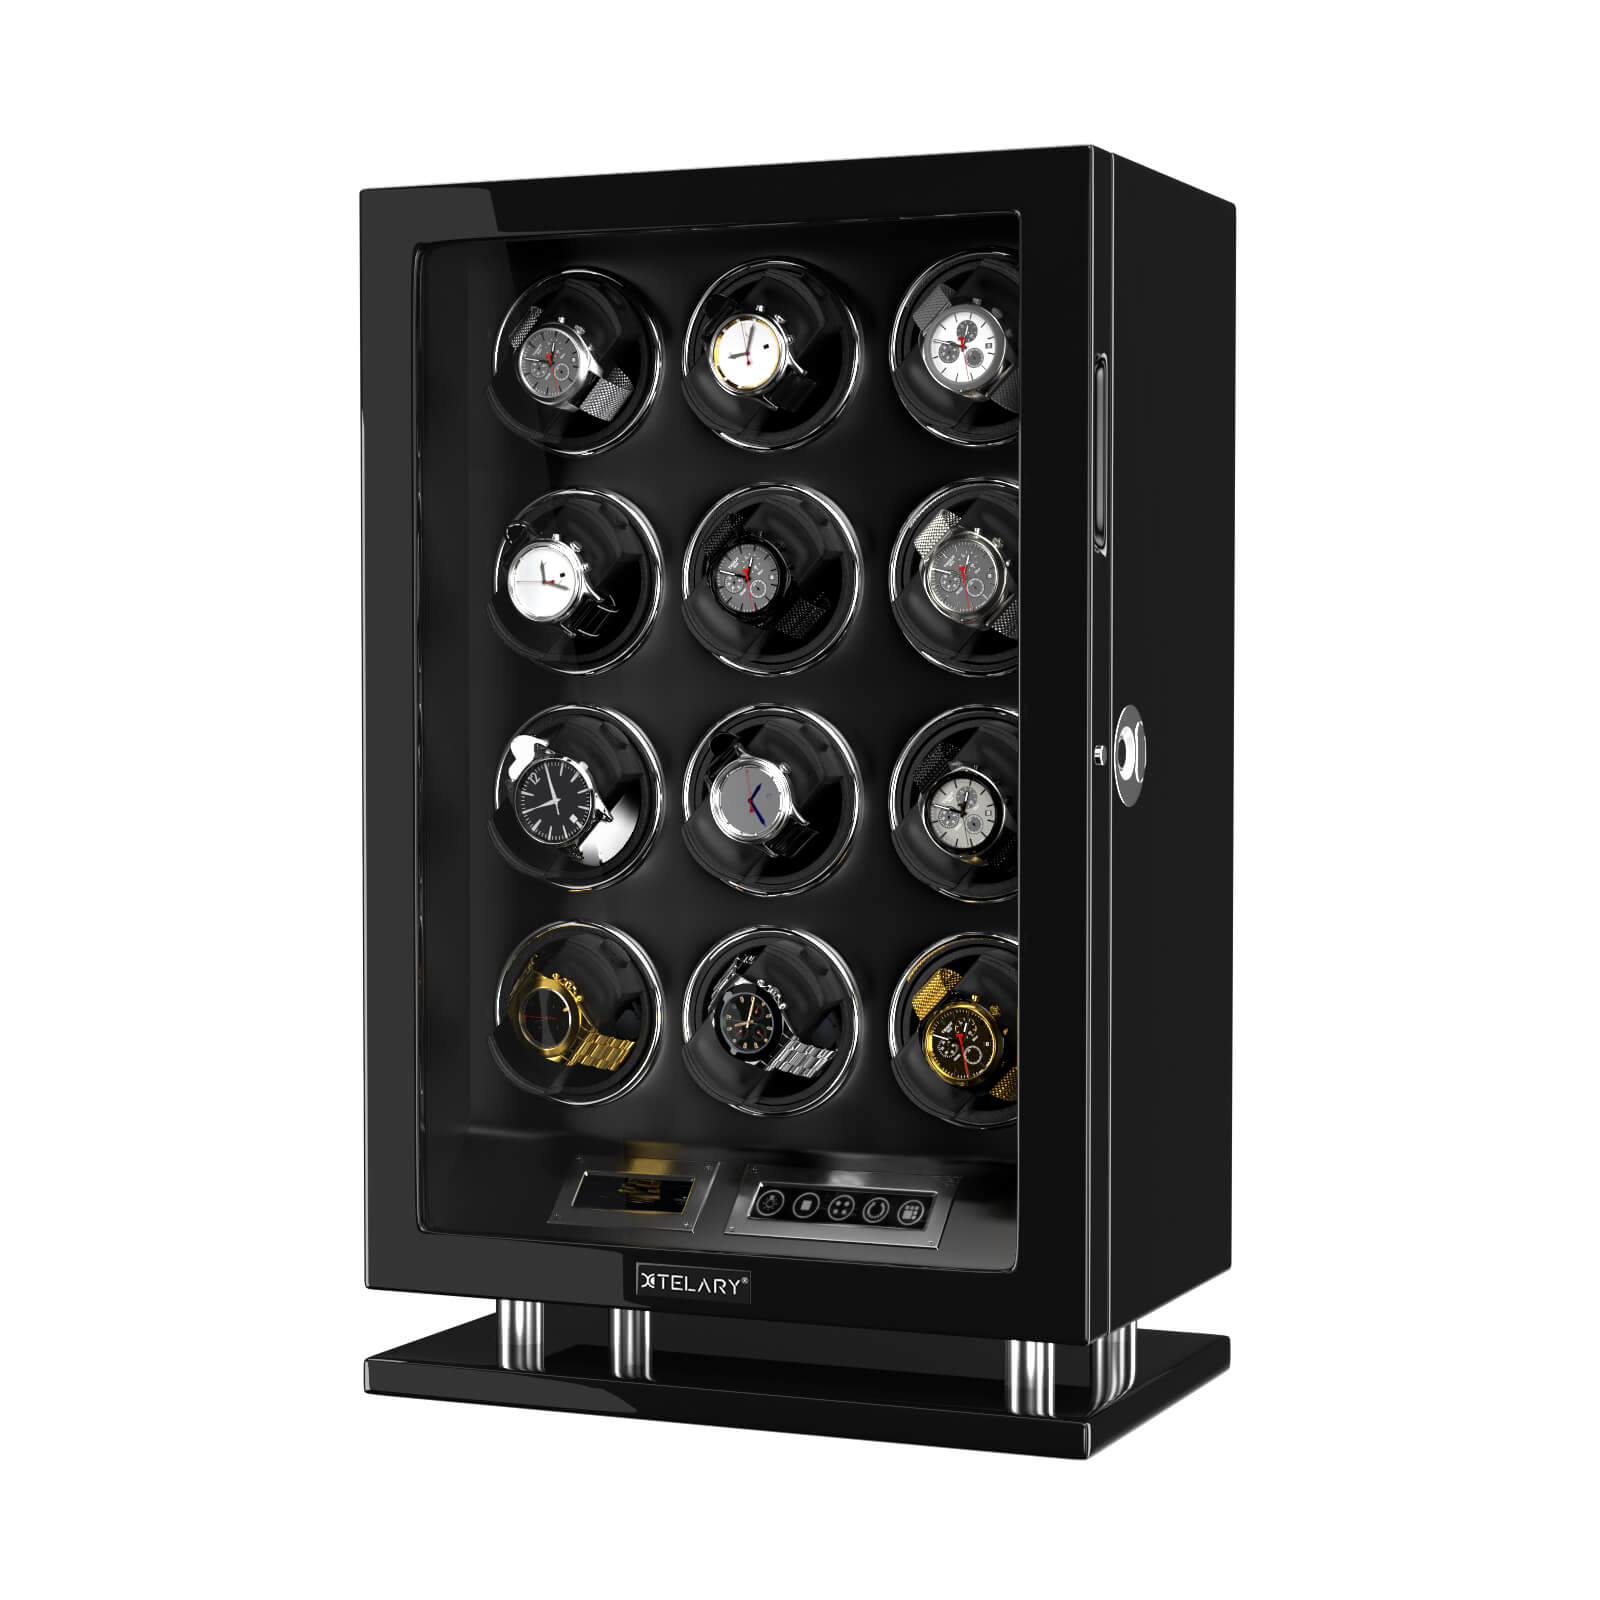 Fingerprint Unlock Watch Winder for 12 Automatic Watches with LCD Touchscreen Control